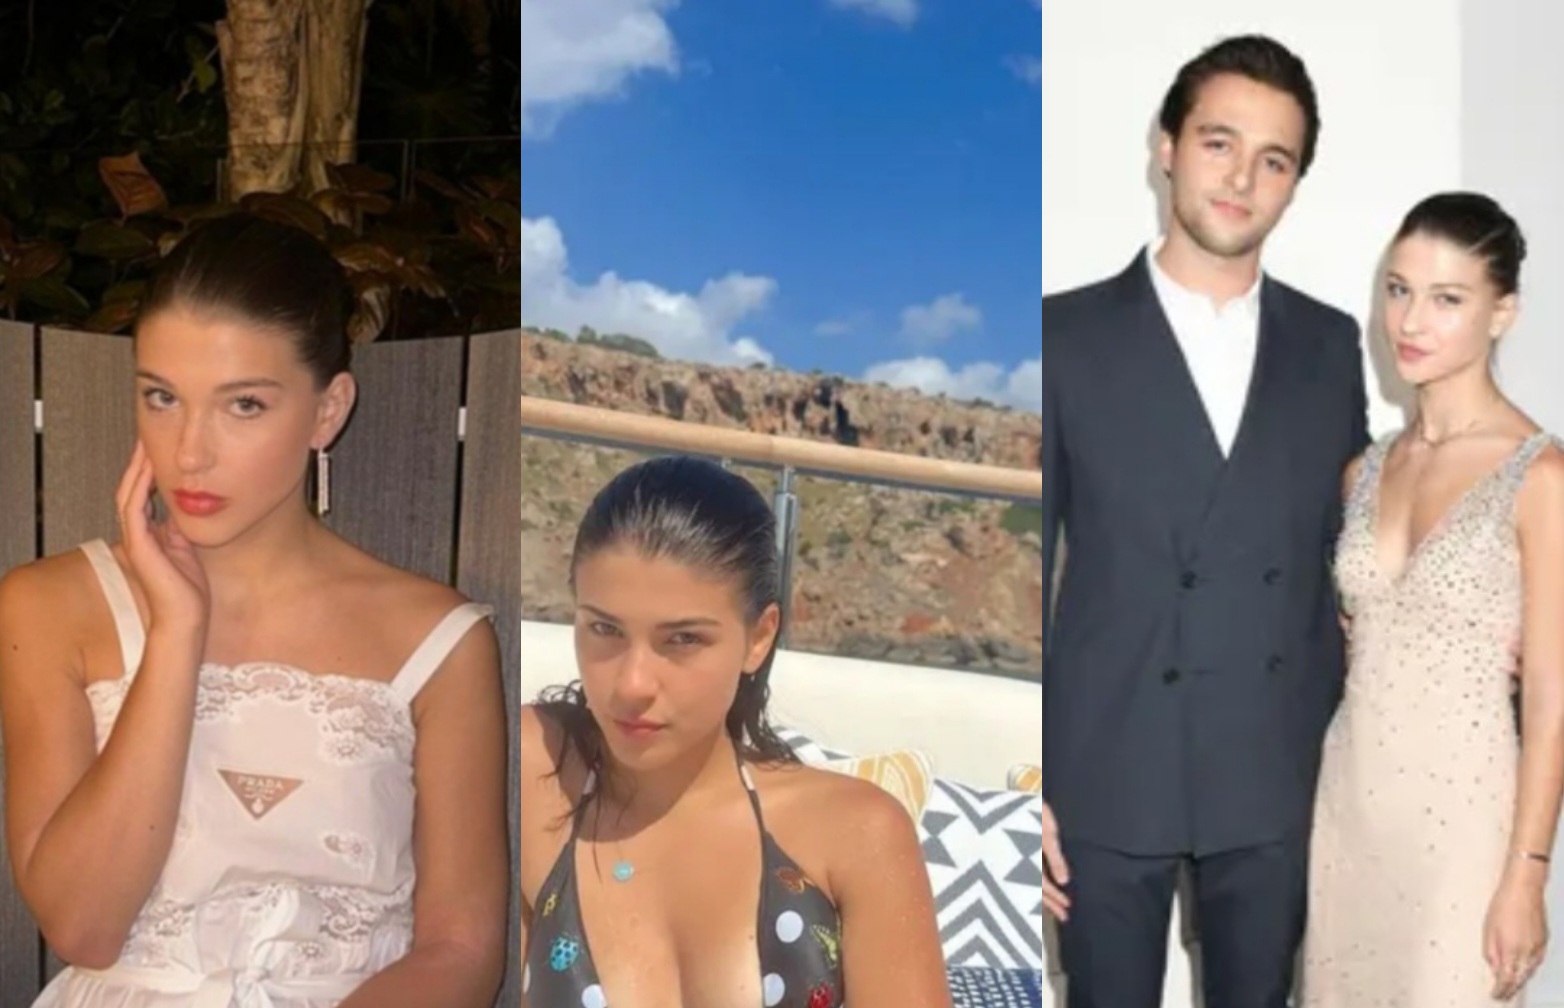 Phoebe, the daughter of Bill Gates, has confirmed that she is dating Arthur Donald, the grandson of Paul McCartney.